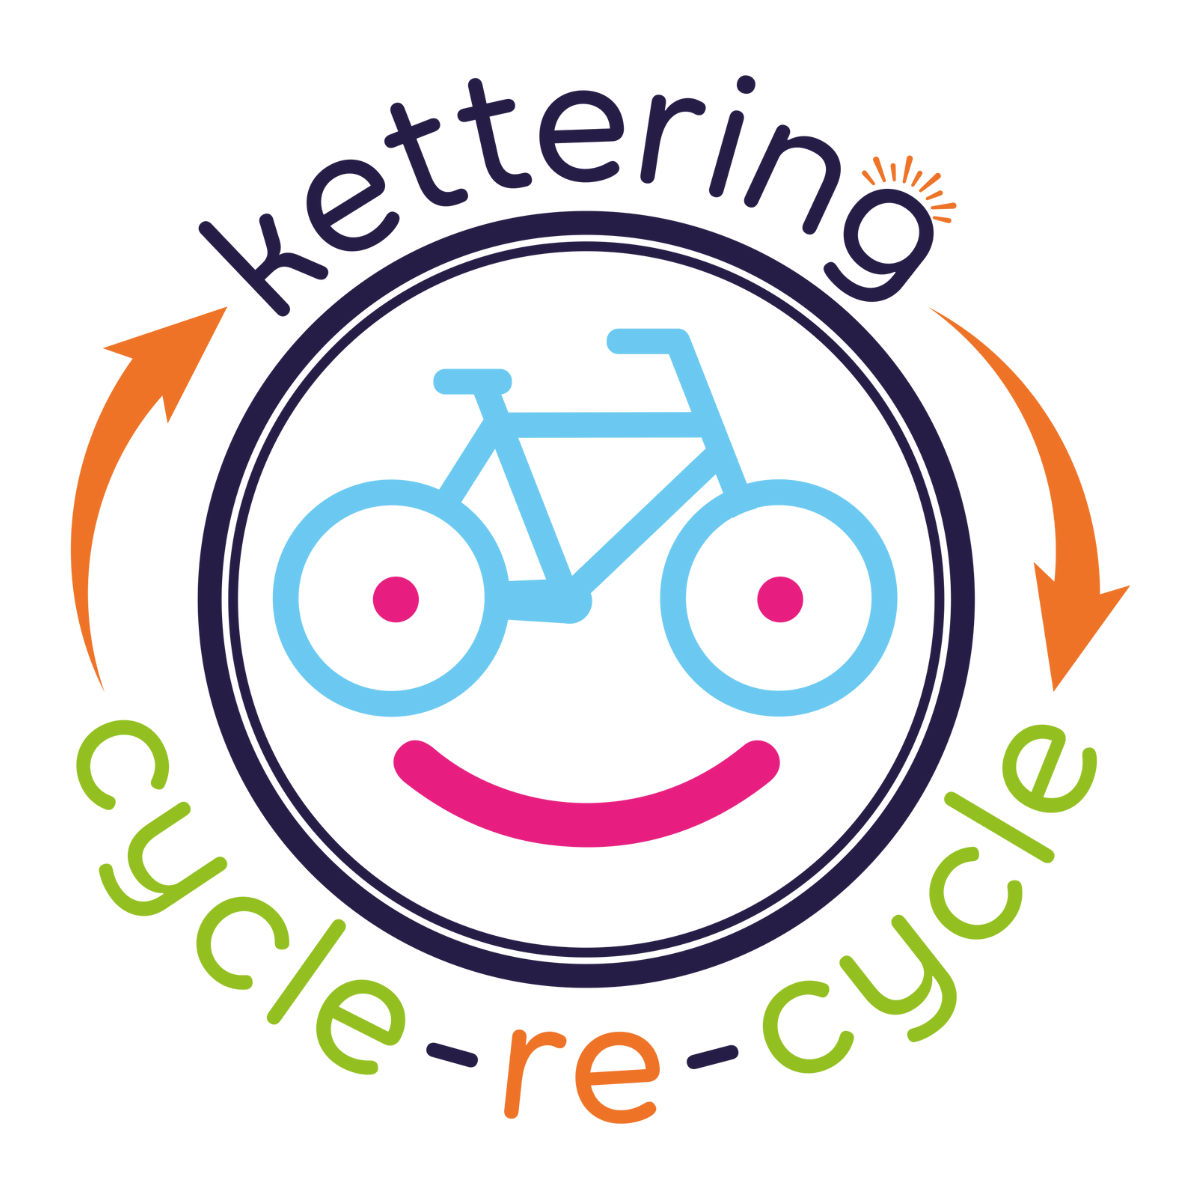 cycle re cycle logo